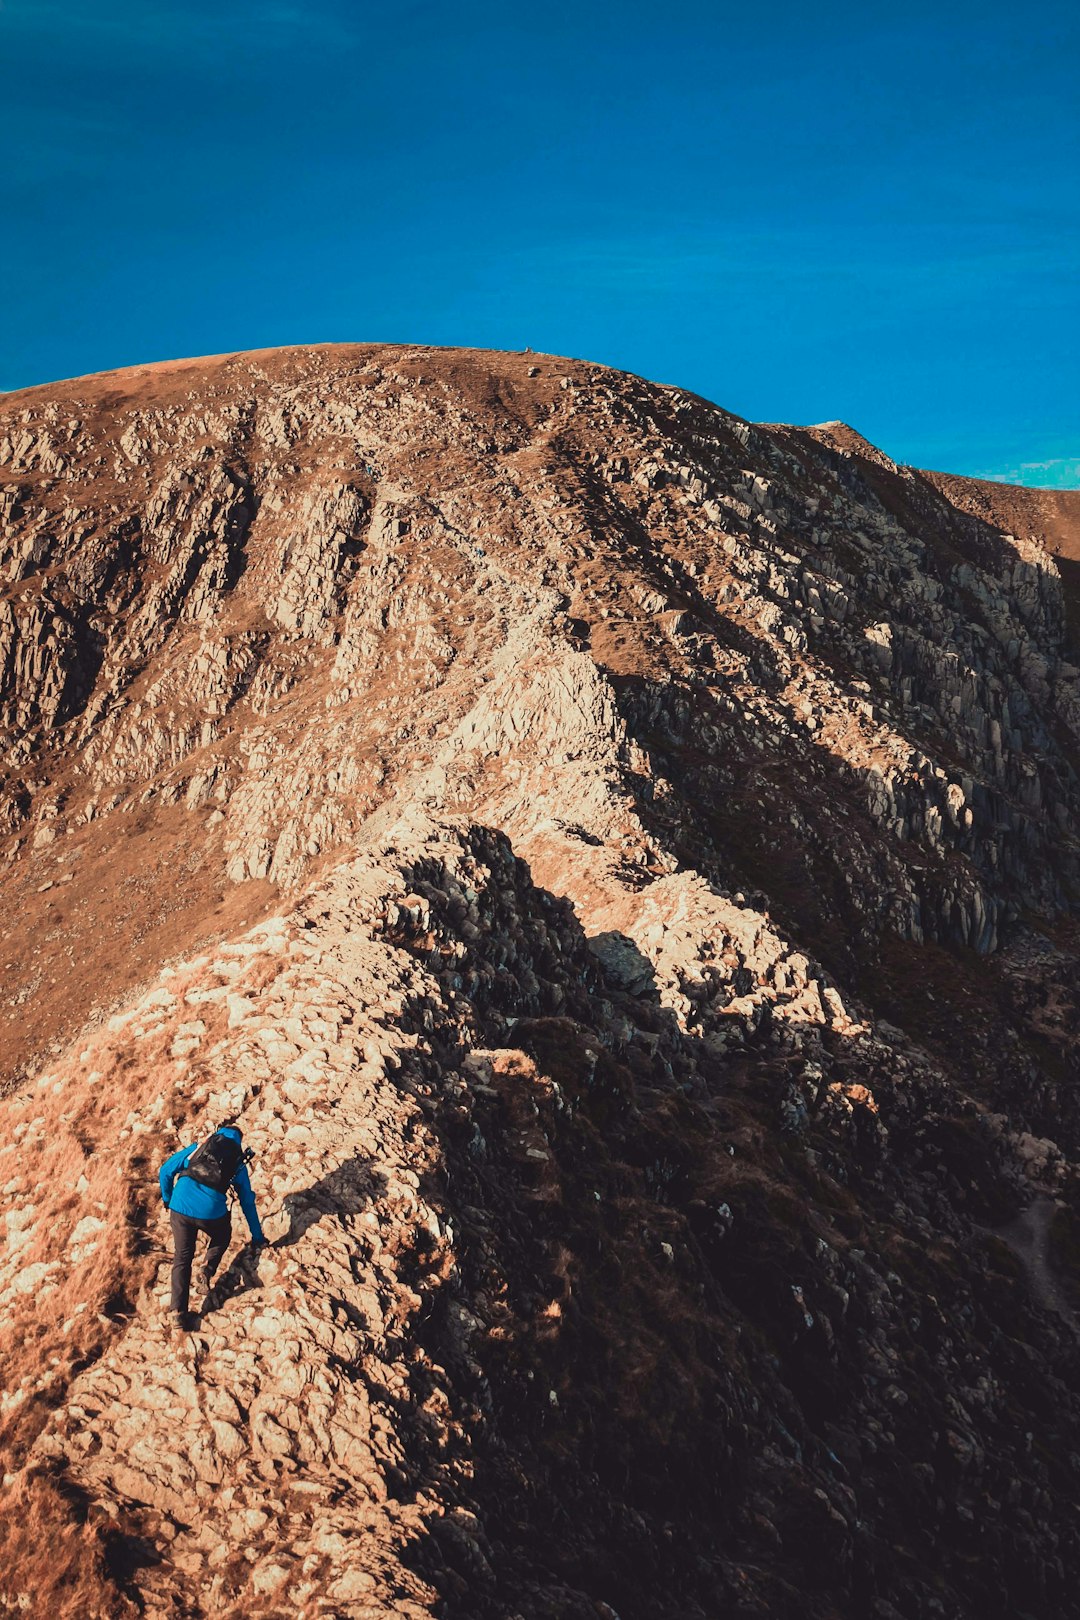 man in blue jacket and blue backpack walking on rocky mountain during daytime